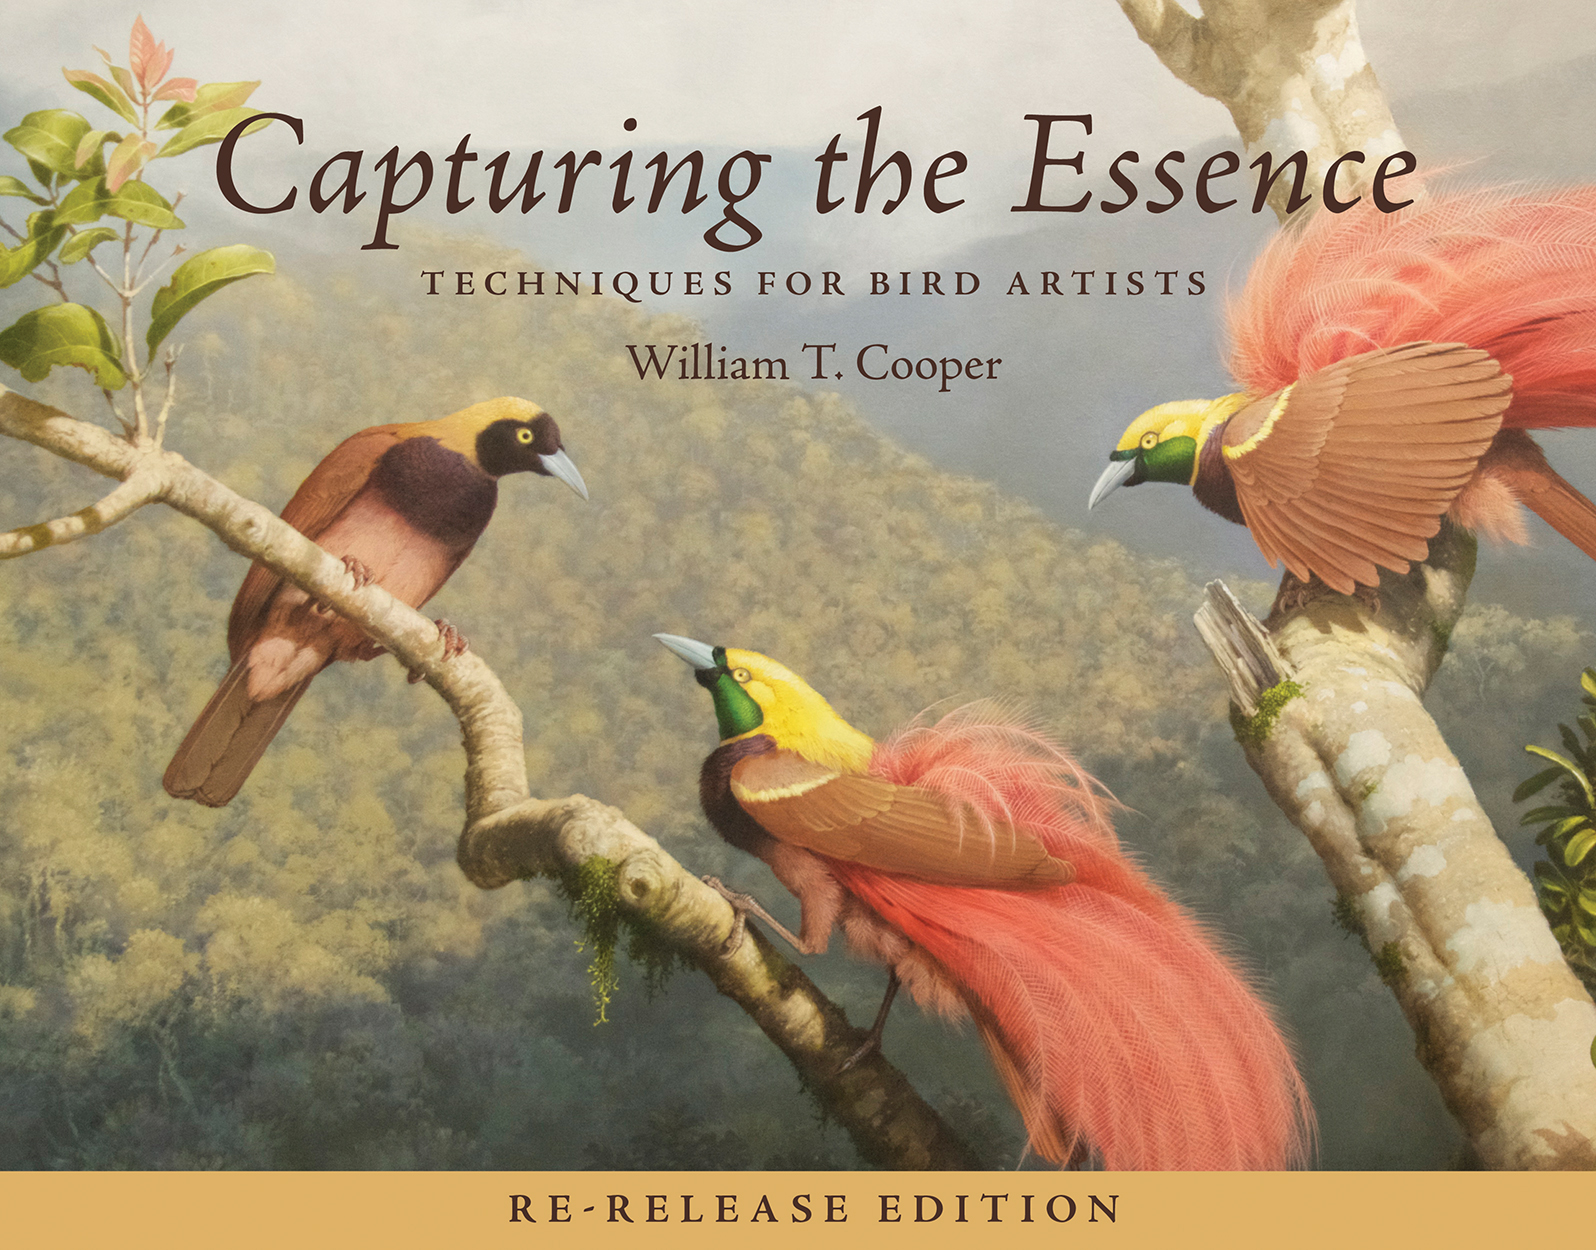 Cover of 'Capturing the Essence', featuring artwork of three Raggiana birds of paradise perched on branches in front of a valley.